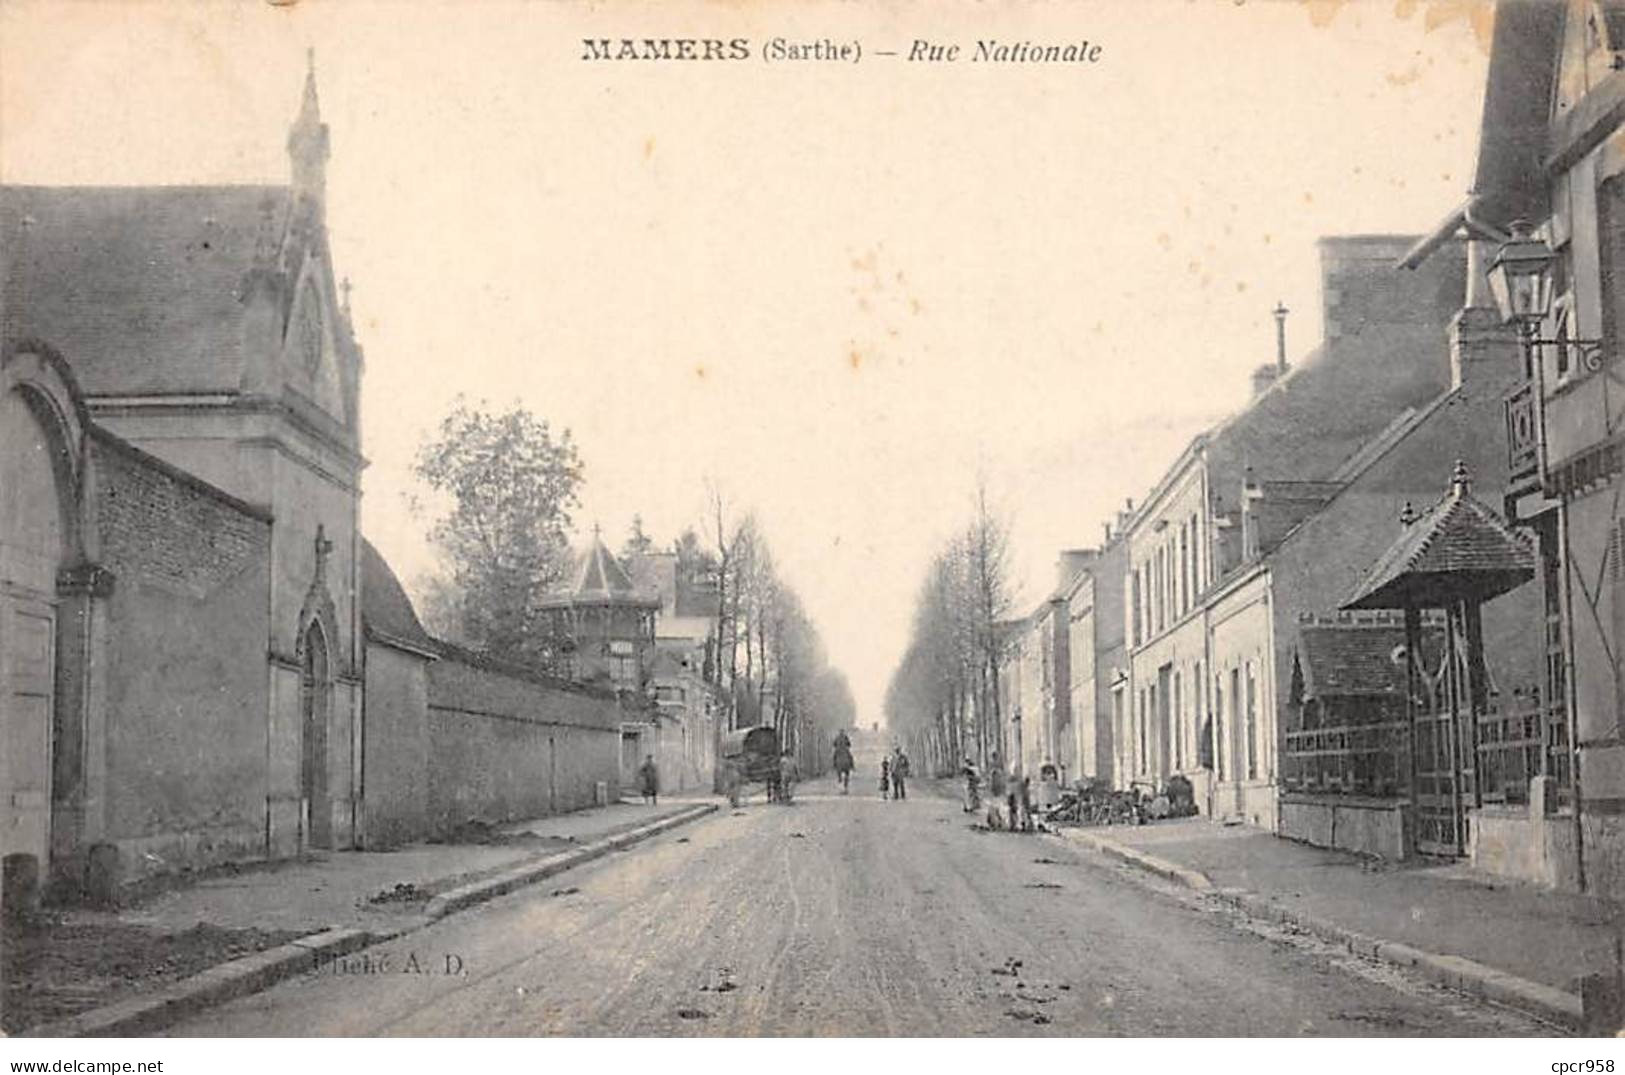 72 - MAMERS - SAN54663 - Rue Nationale - Mamers